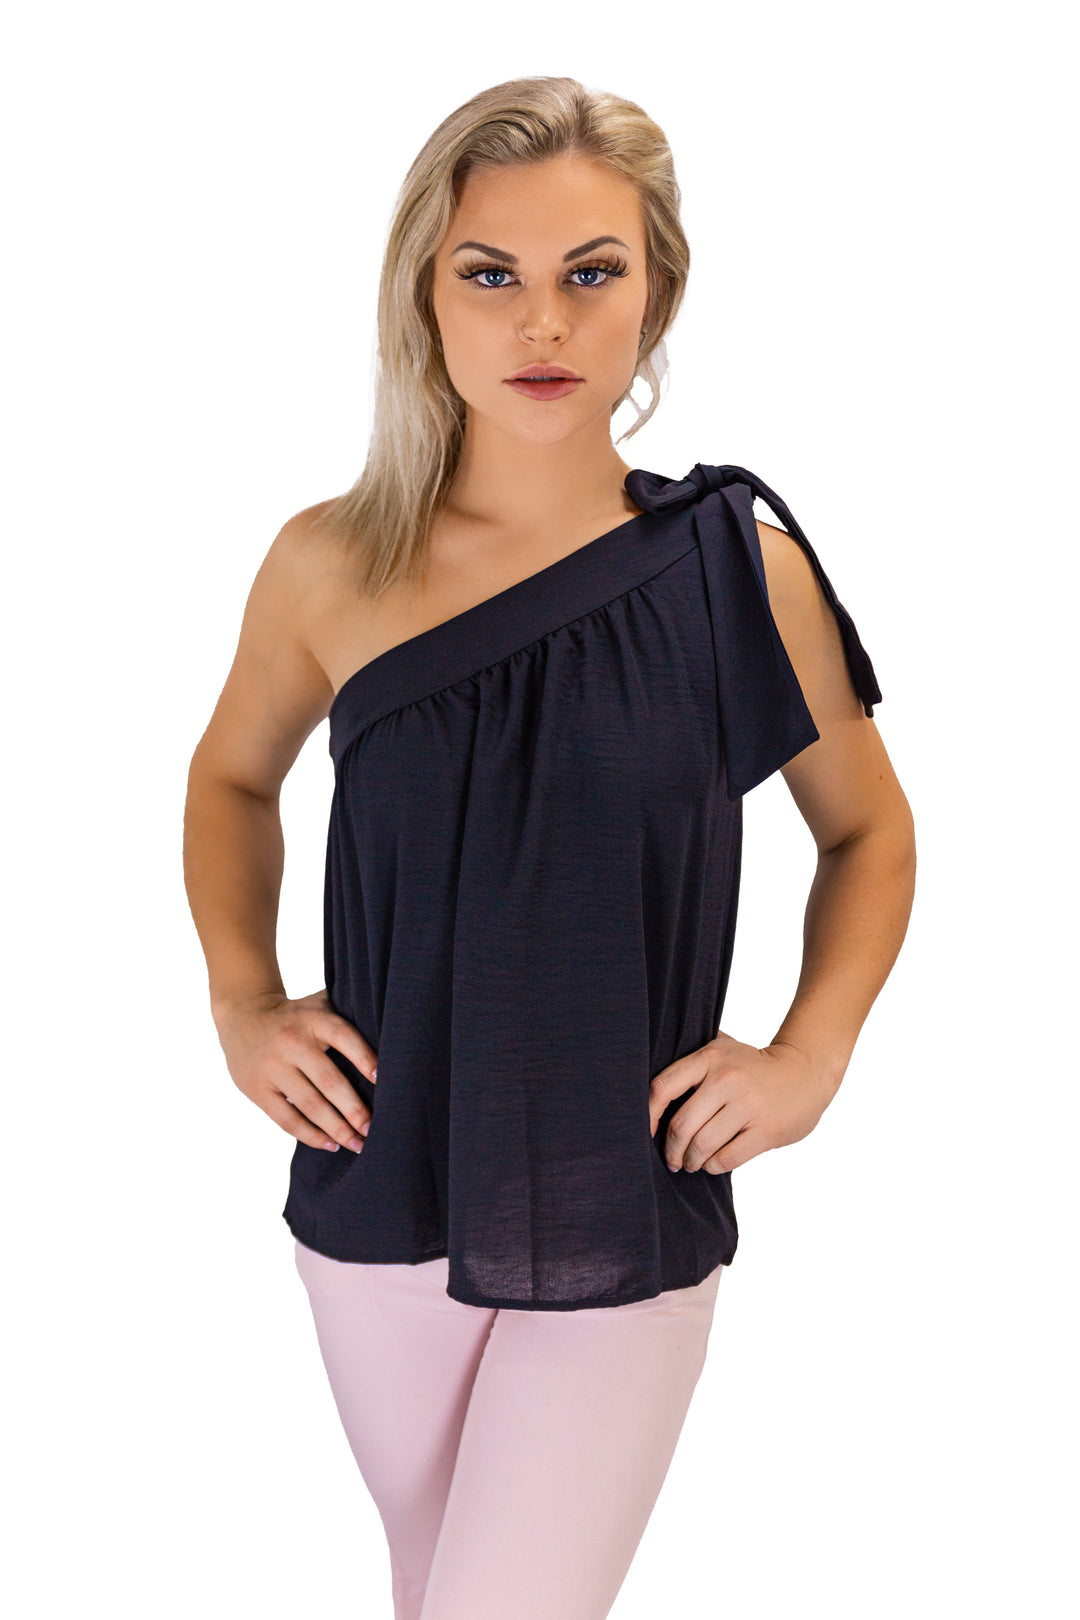 Fabonics Elegance Unveiled One-Shoulder Black Top with Tie-Up Detail, Perfect for Versatile Day and Evening Style